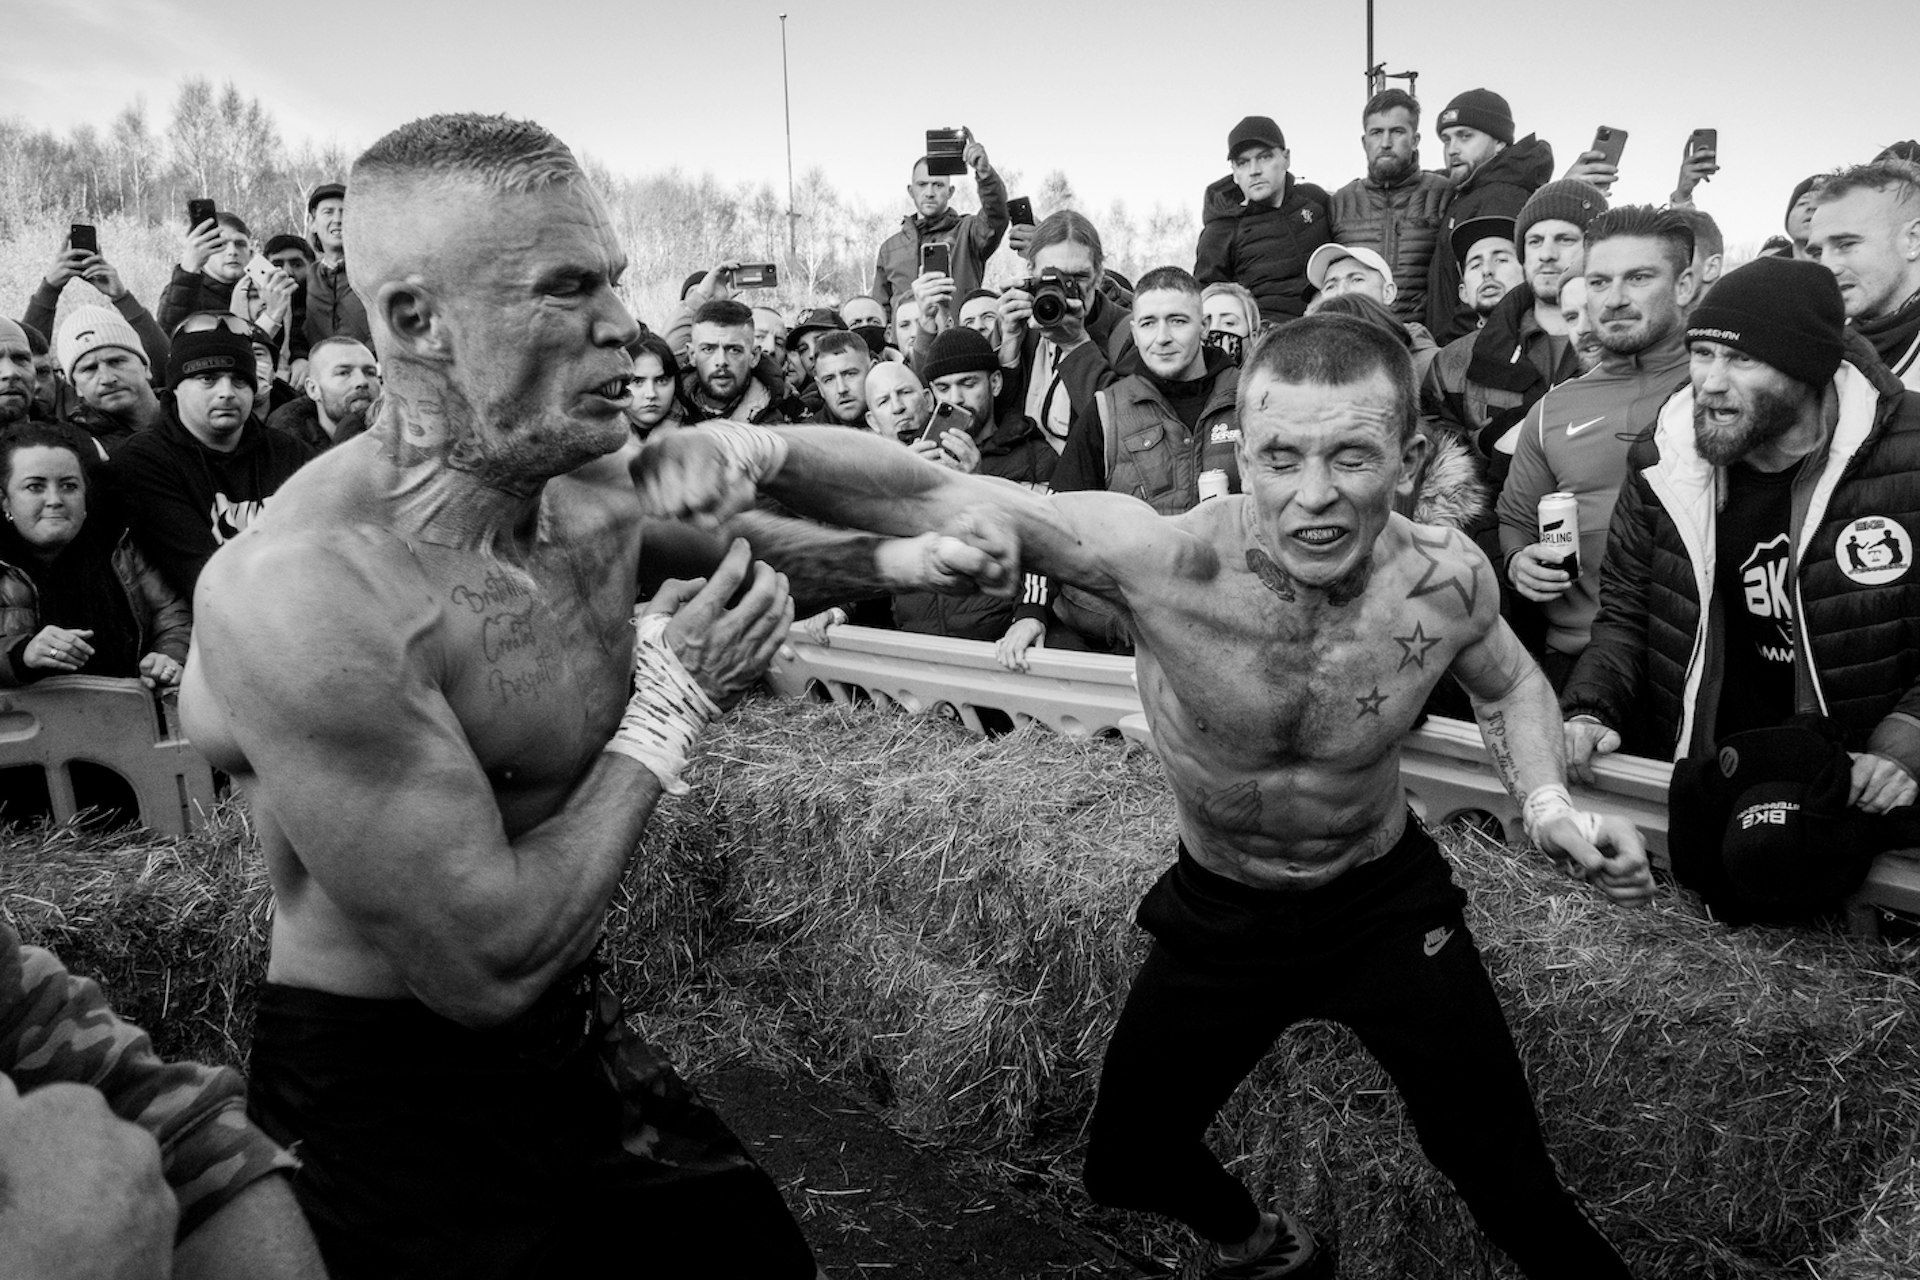 Inside the UK’s only licensed bare knuckle fight club